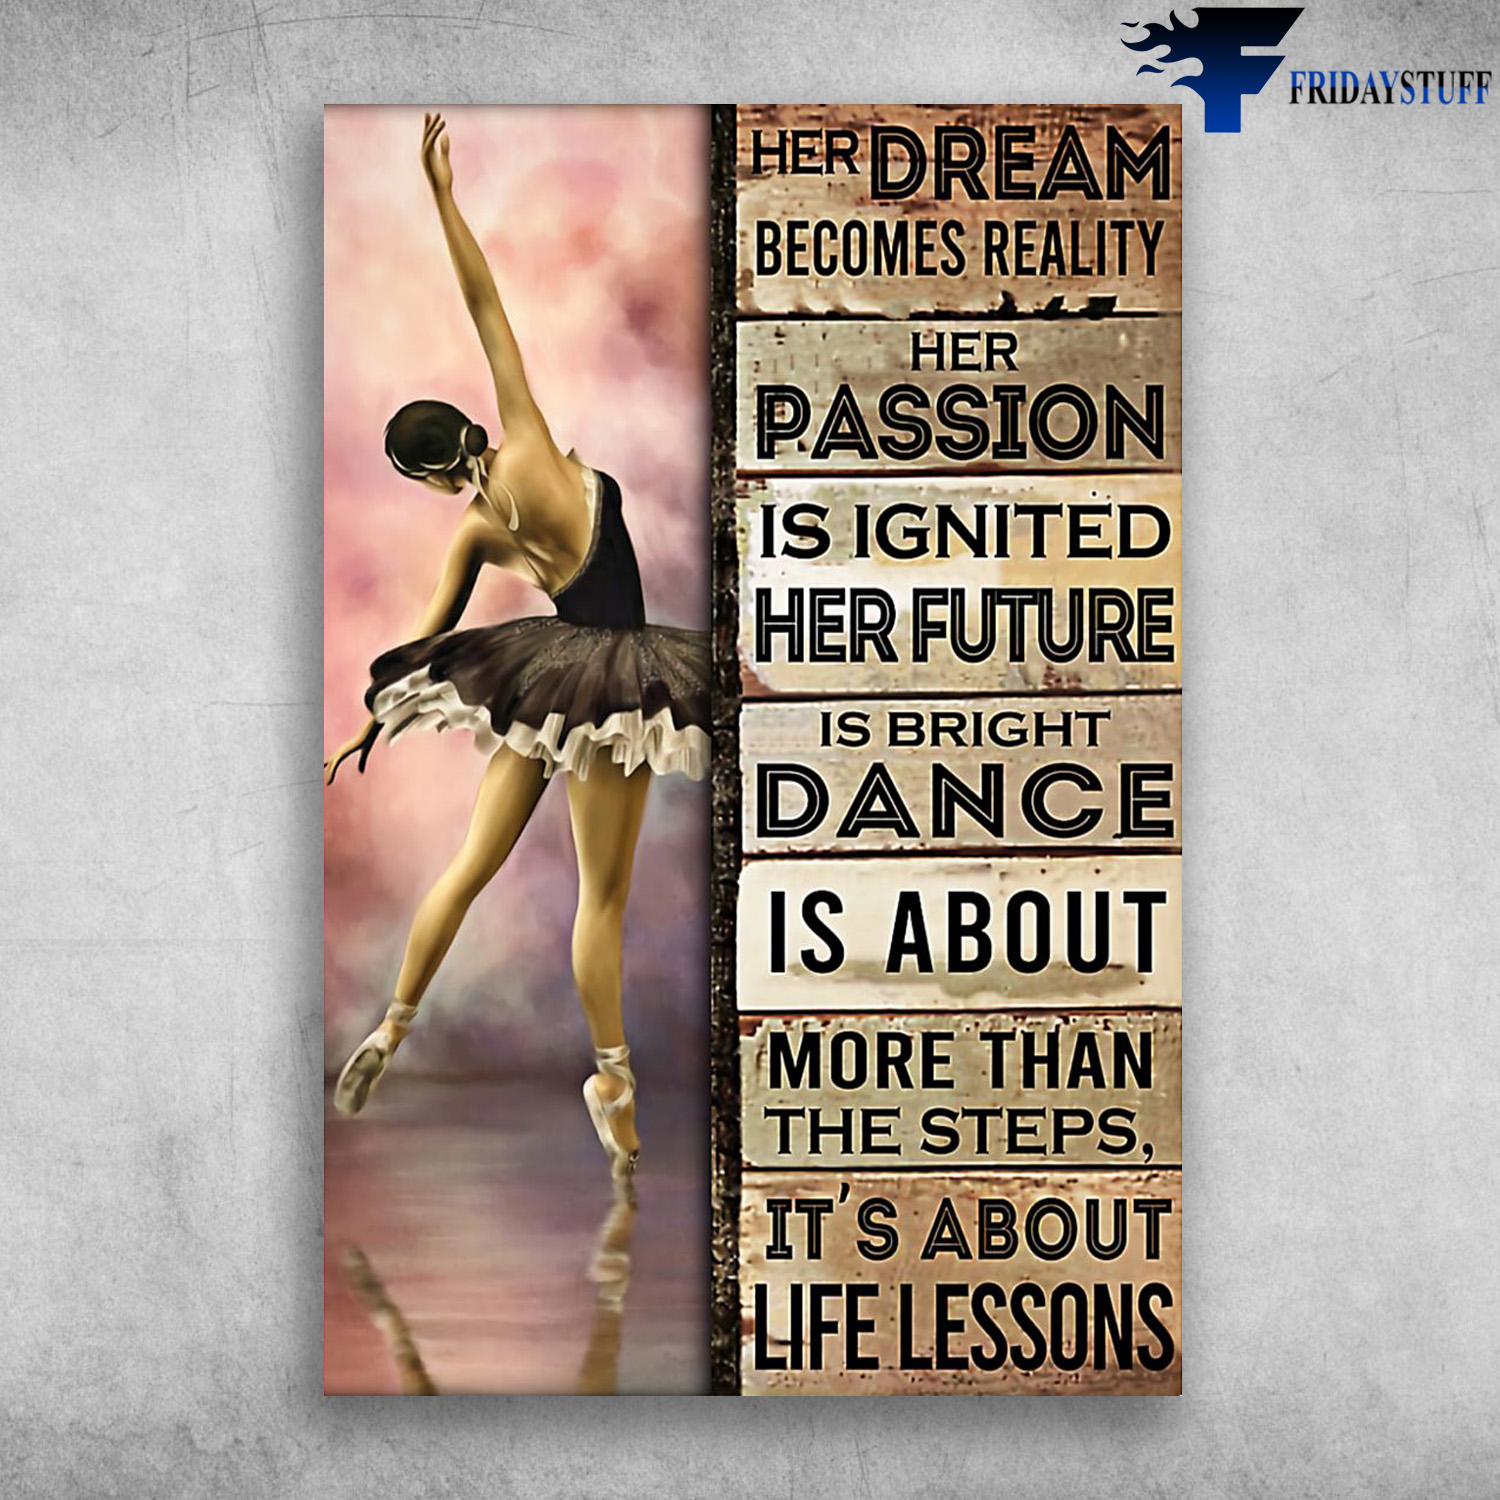 Ballet Girl - Her Dream Becomes Reality, Her Passion Is Ignited, Her Future Is Bright, Dance Is About More Than The Steps, It's About Life Lessons